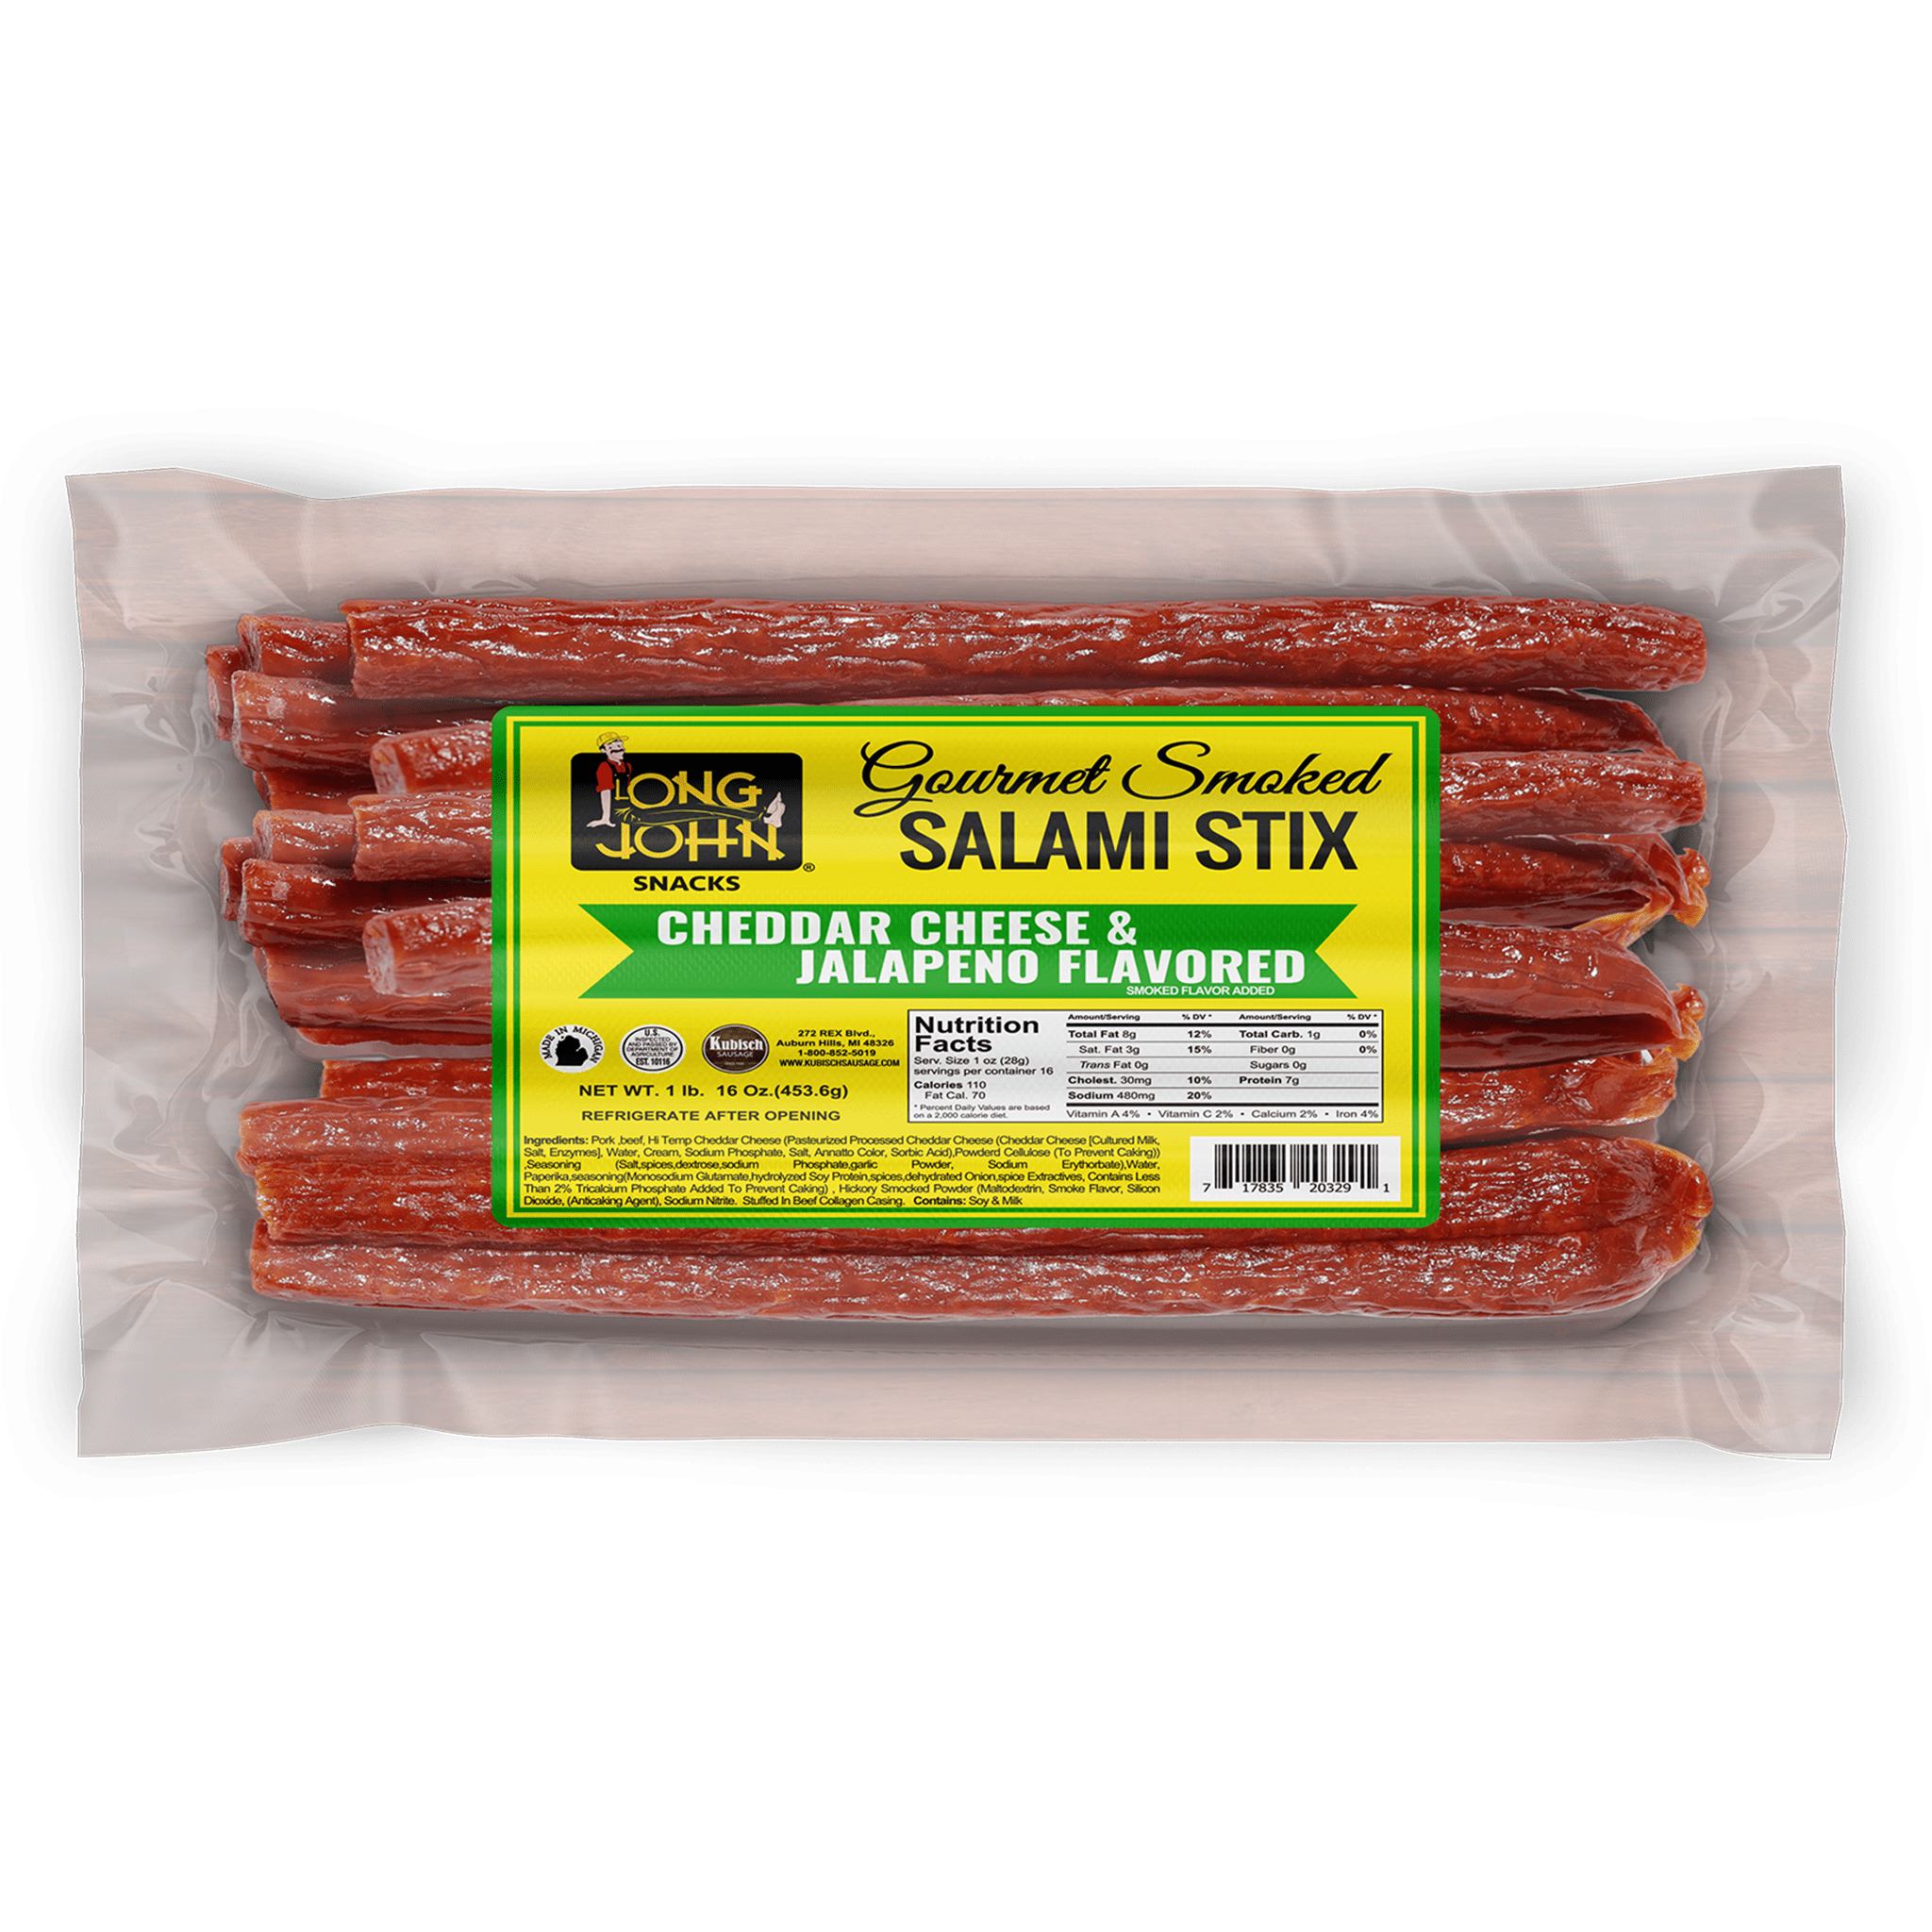 Long John Cheddar Cheese & Jalapeno Salami Stix front of package.